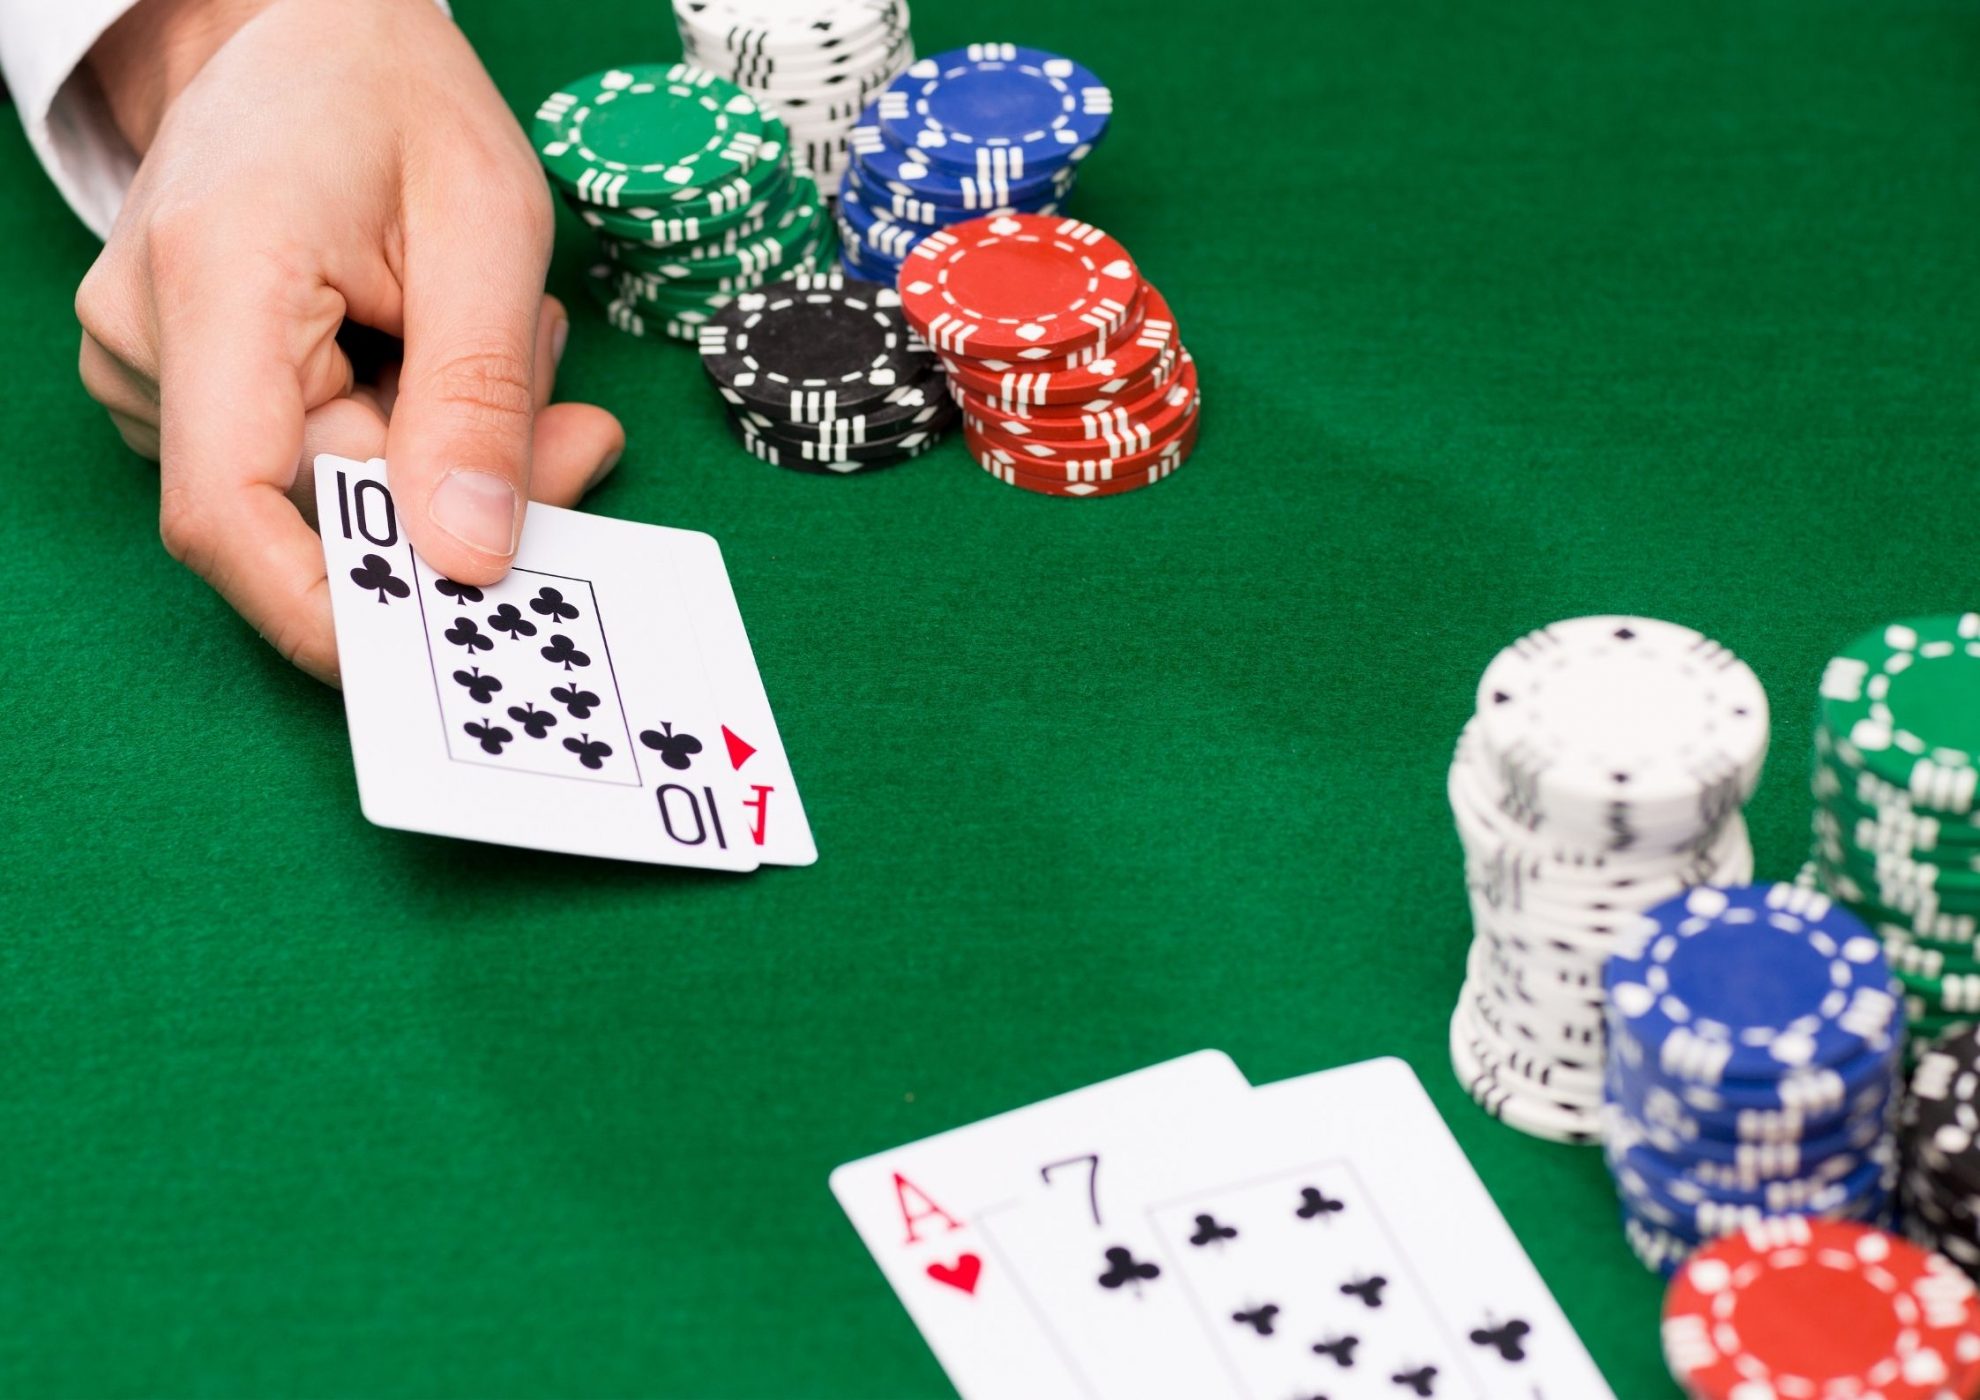 Dive Into The Fun With Real Money Blackjack Games